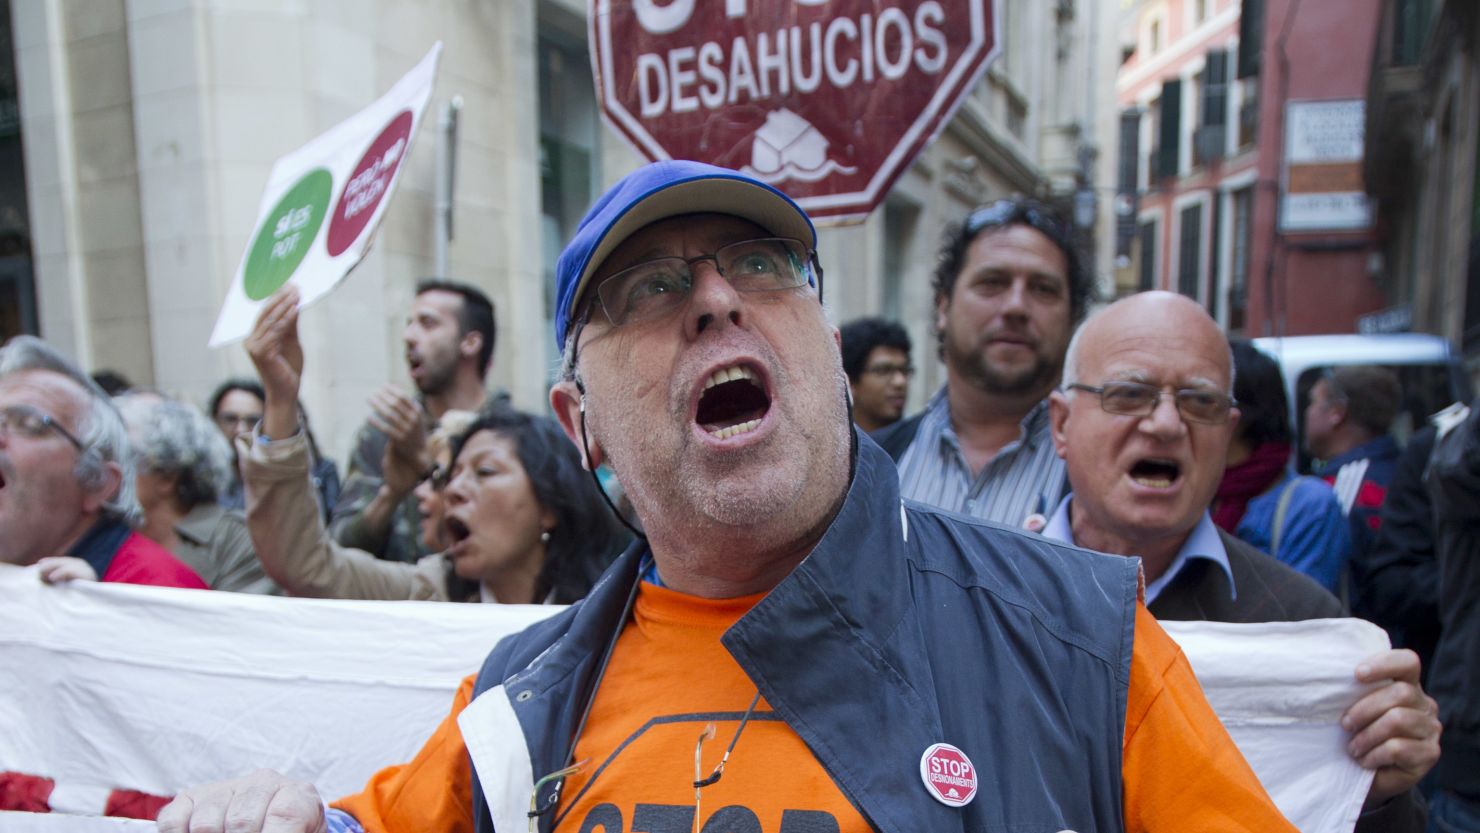 Anti-eviction activists protest against the government's eviction laws in Mallorca on April 23, 2013.  